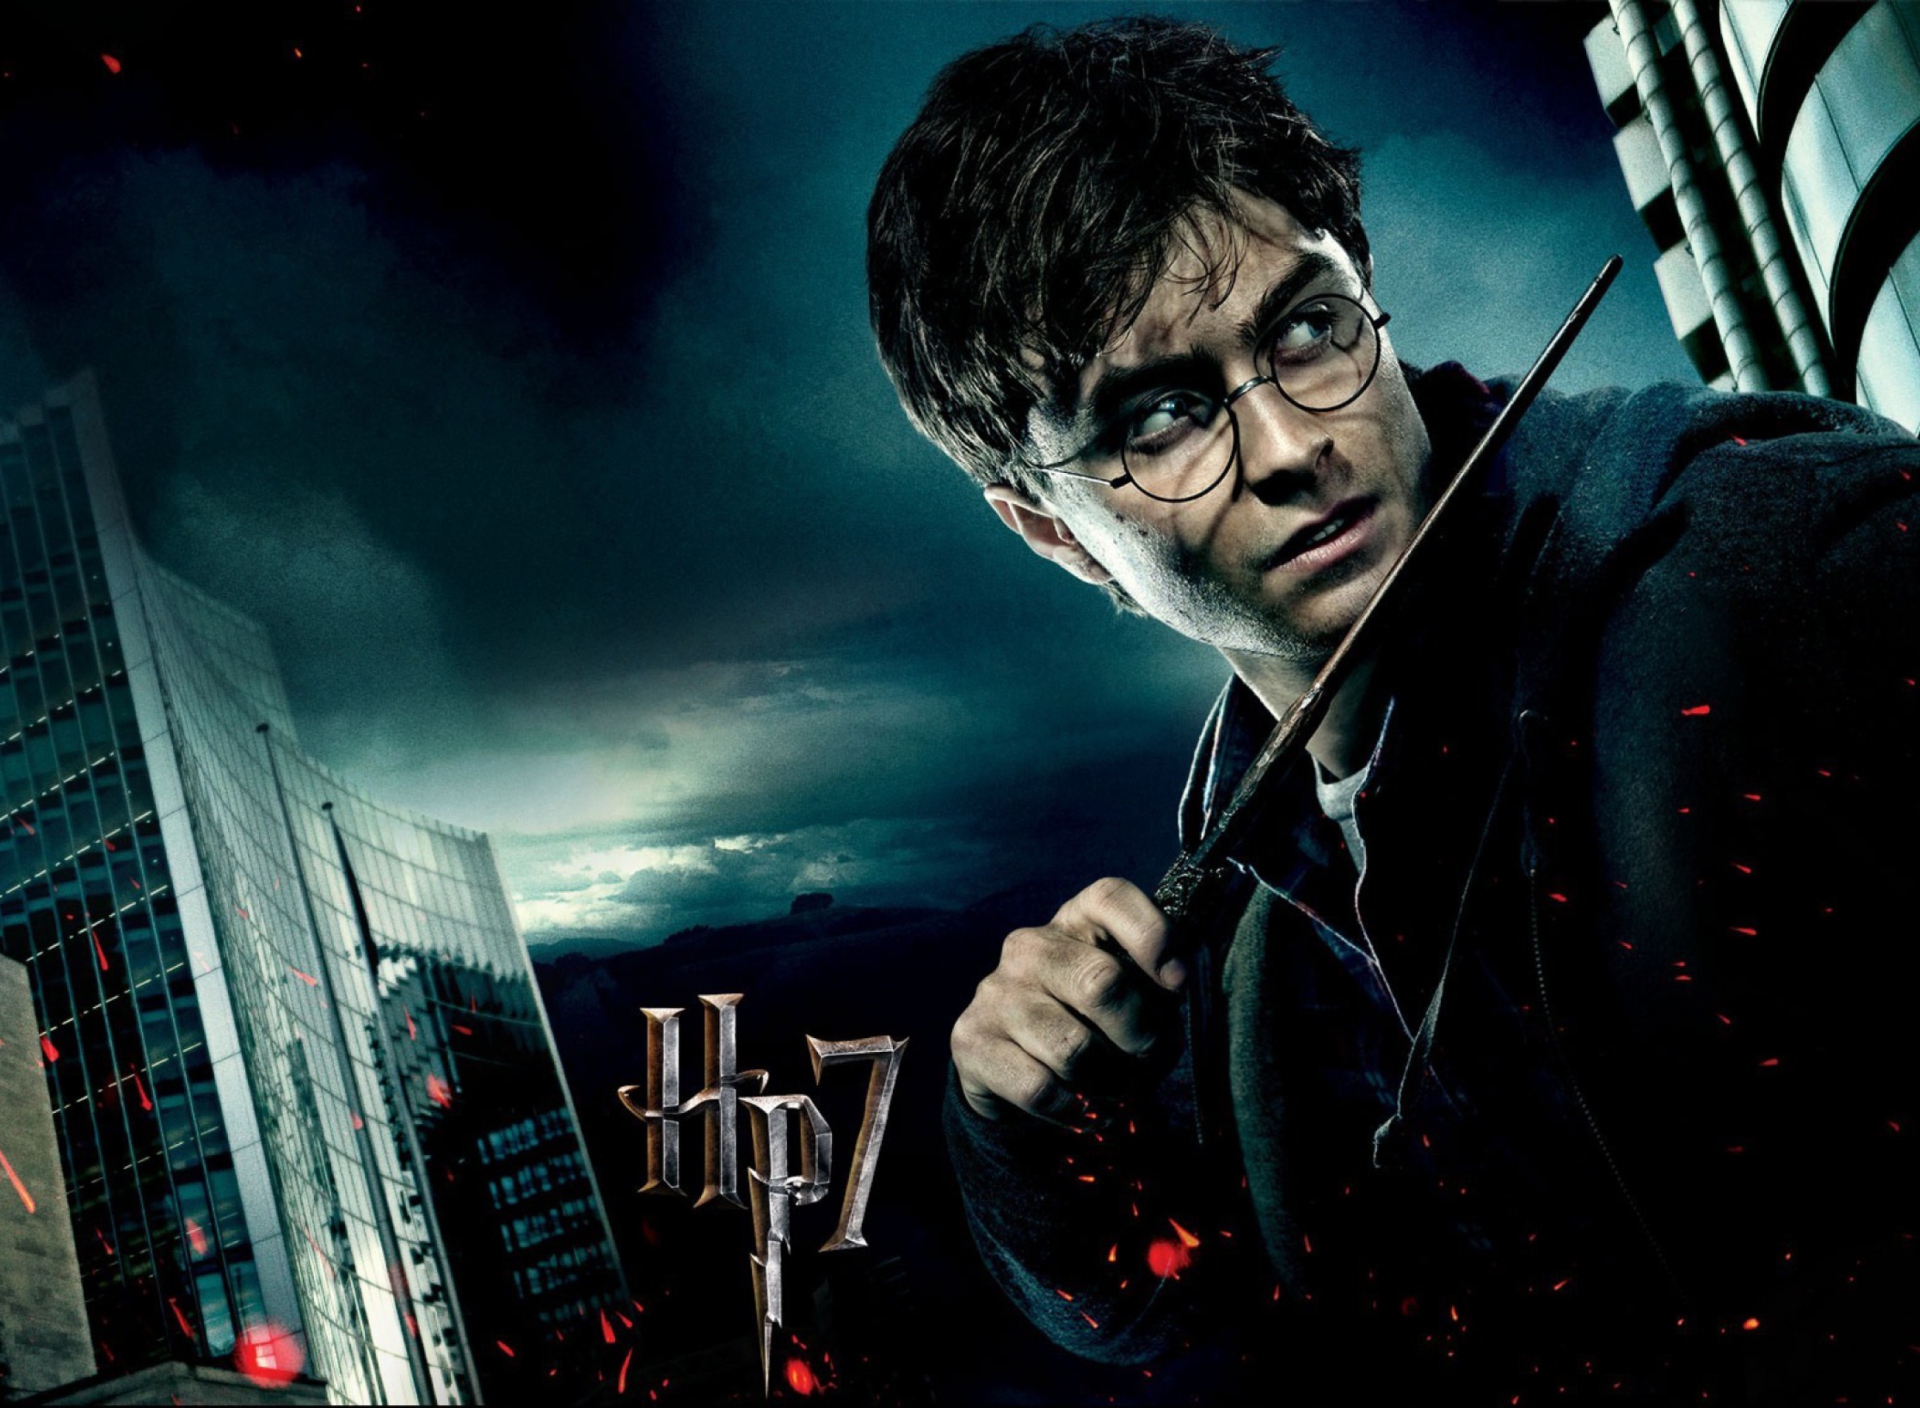 Das Harry Potter And The Deathly Hallows Part-1 Wallpaper 1920x1408